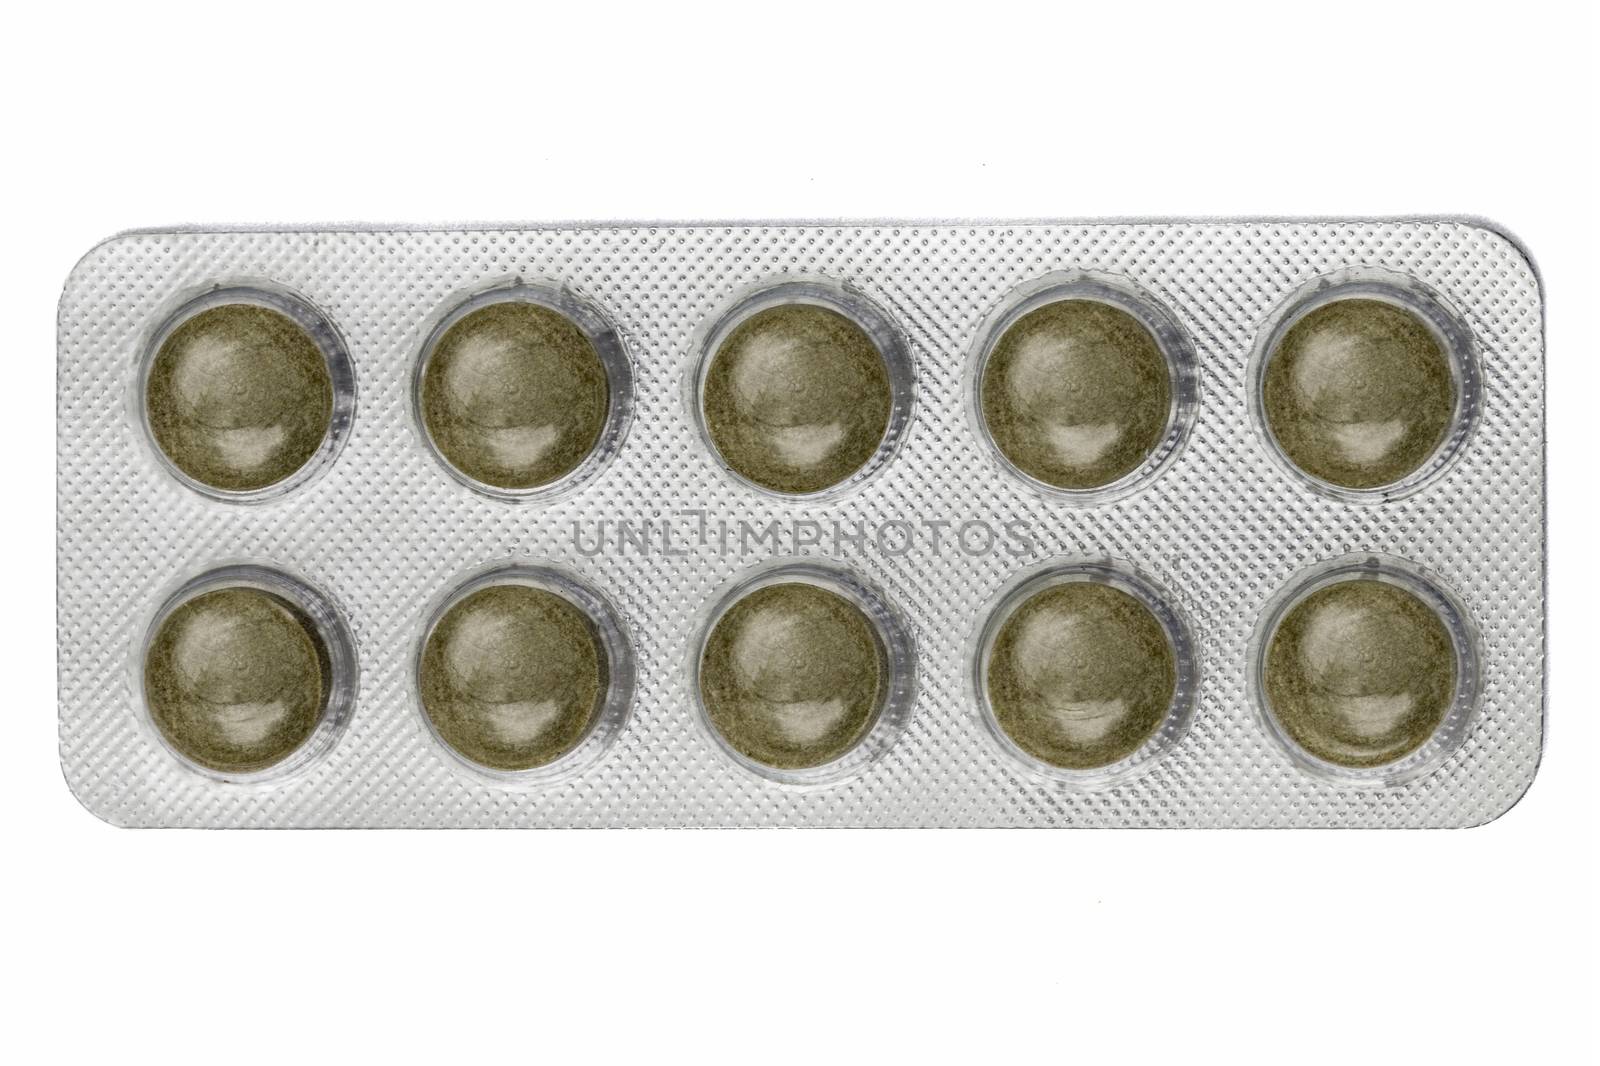 Pills in a blister pack, isolated on white background, with clipping path